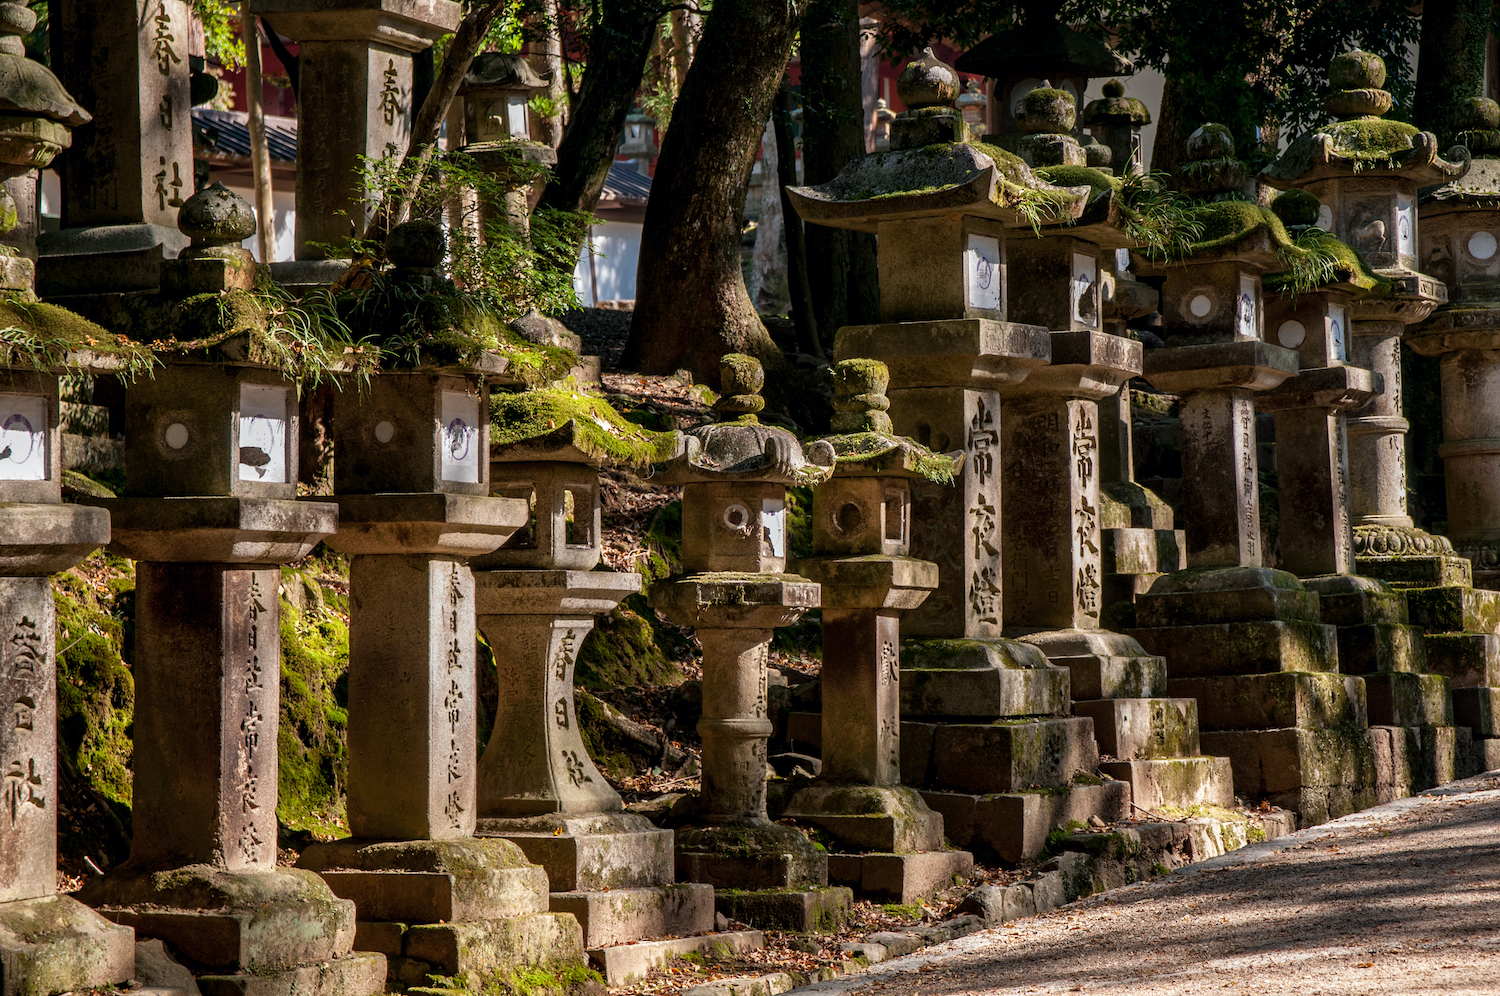 Hundreds of stone lanterns, called "toro", are lined up in the driveways leading to the Kasuga Shinto shrine in Nara, Japan, on Nov 6, 2017.